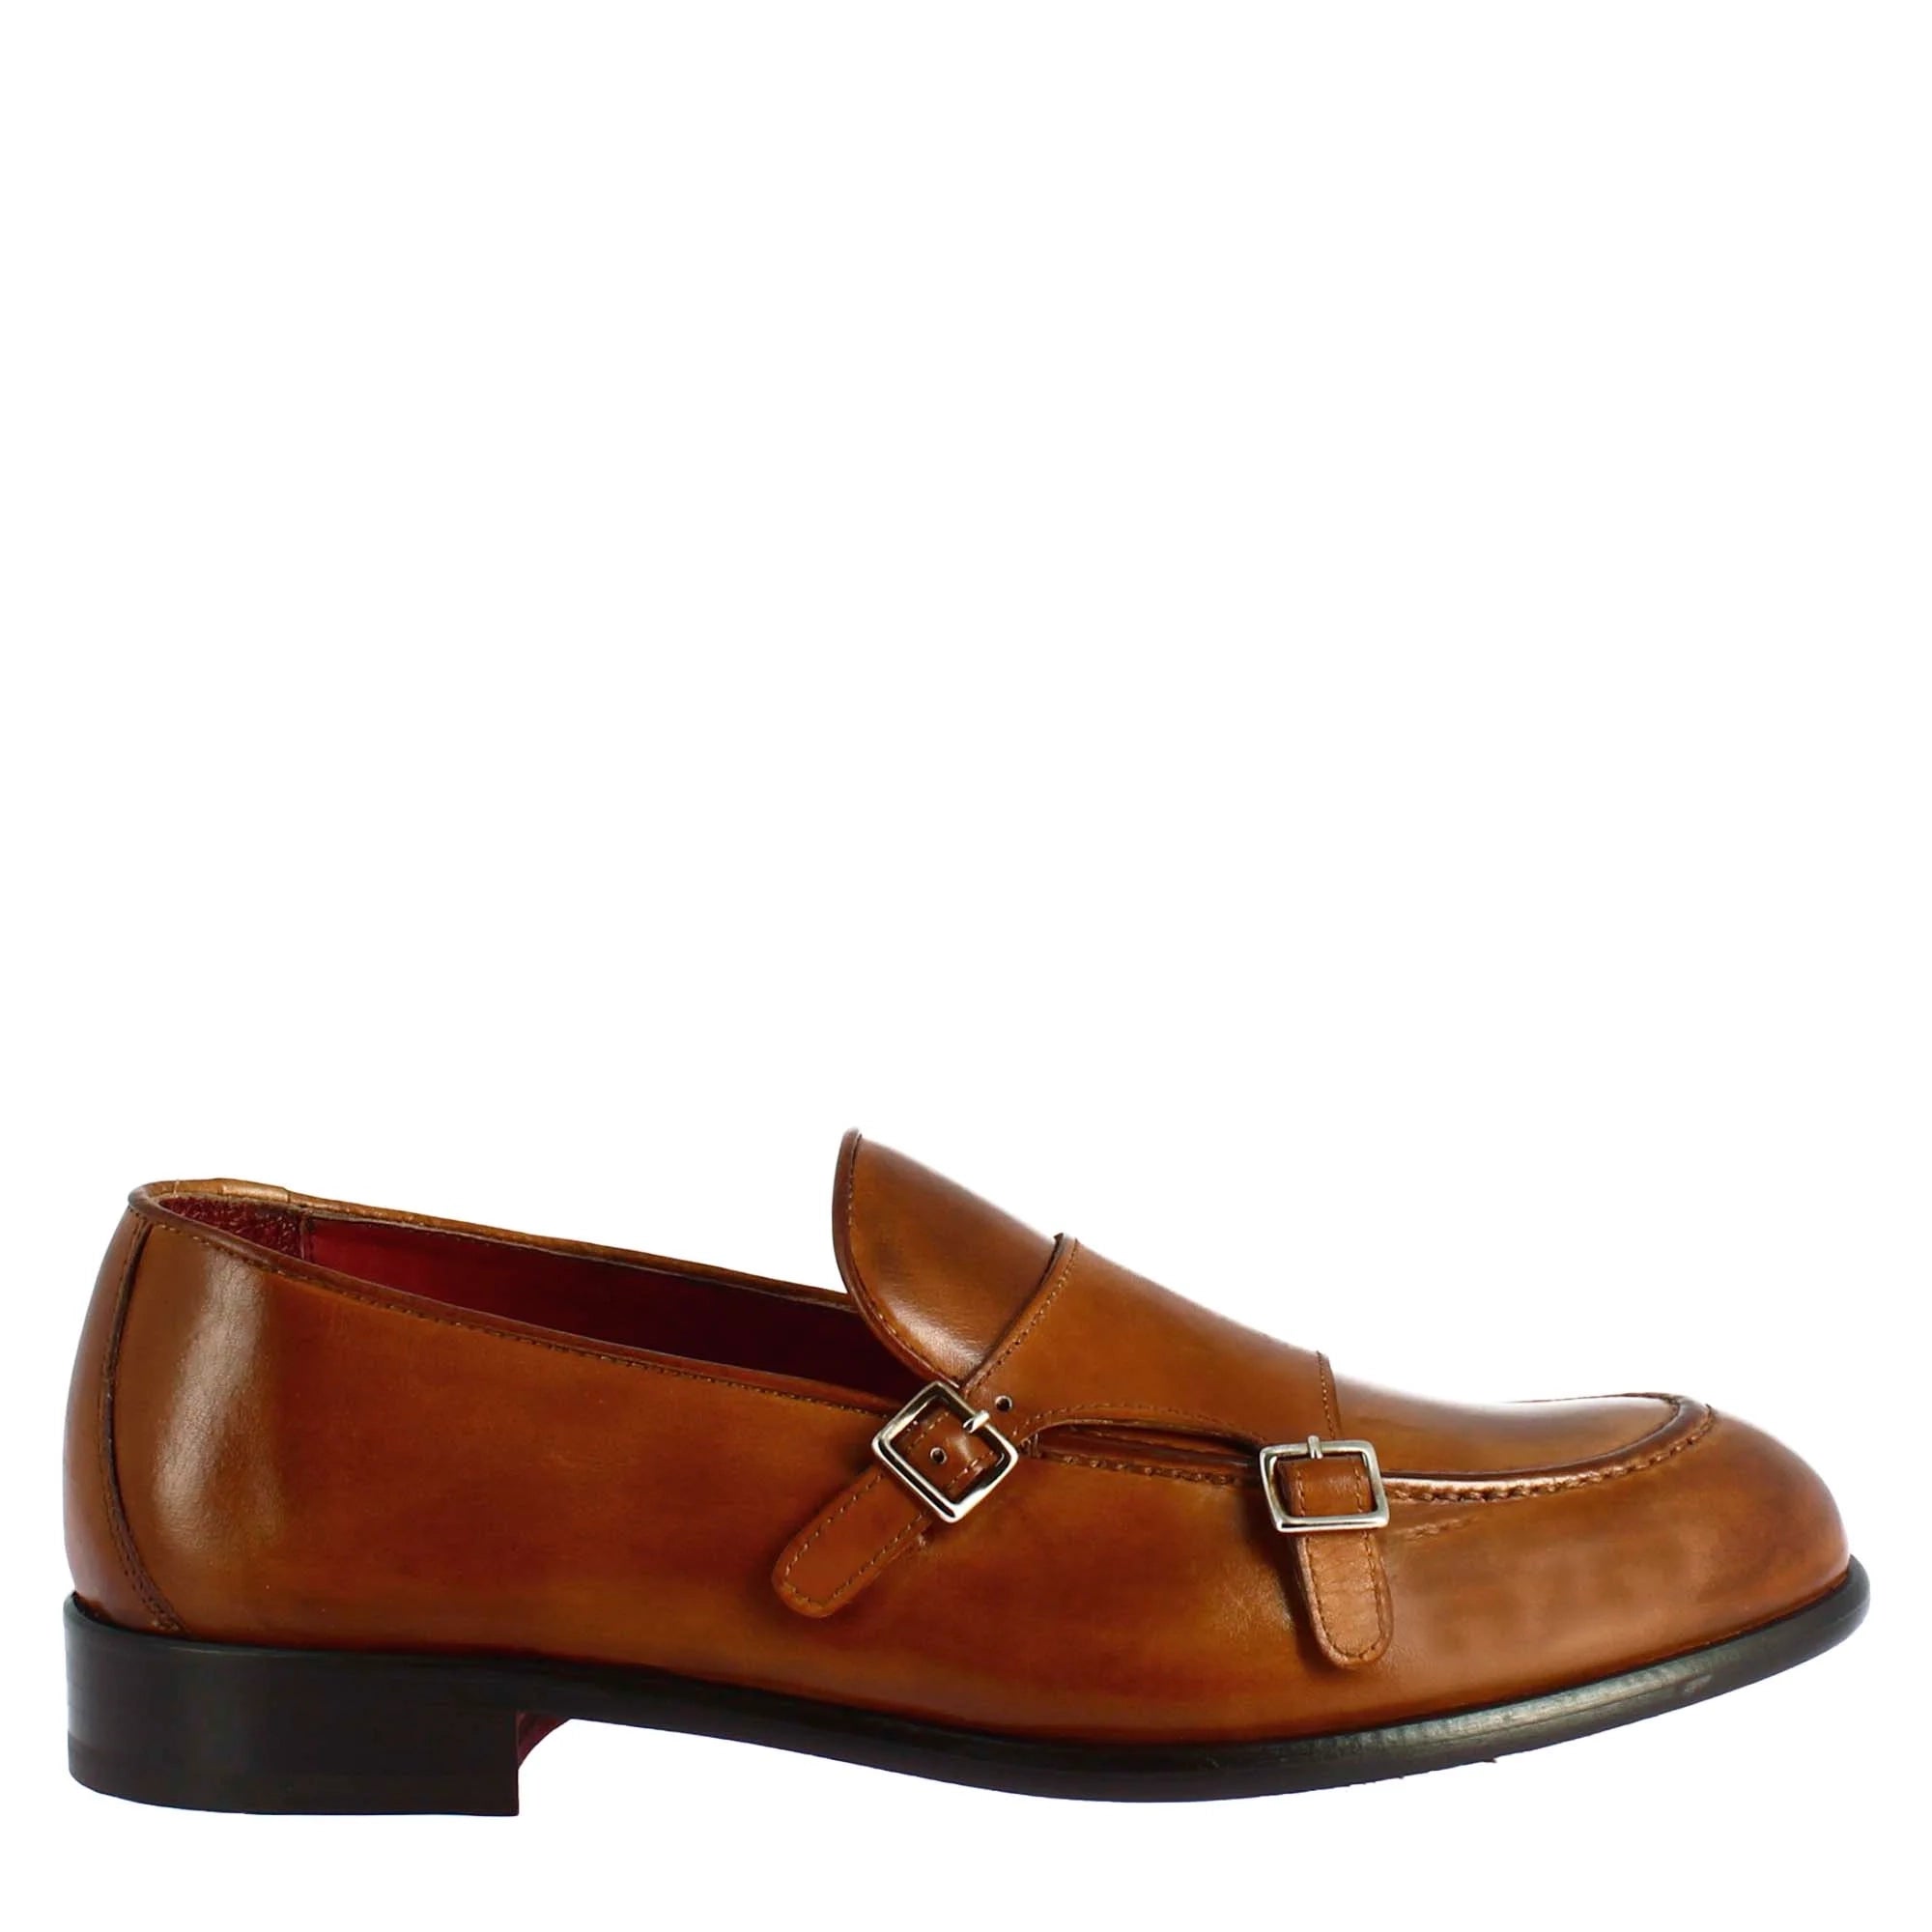 Brown double buckle moccasin